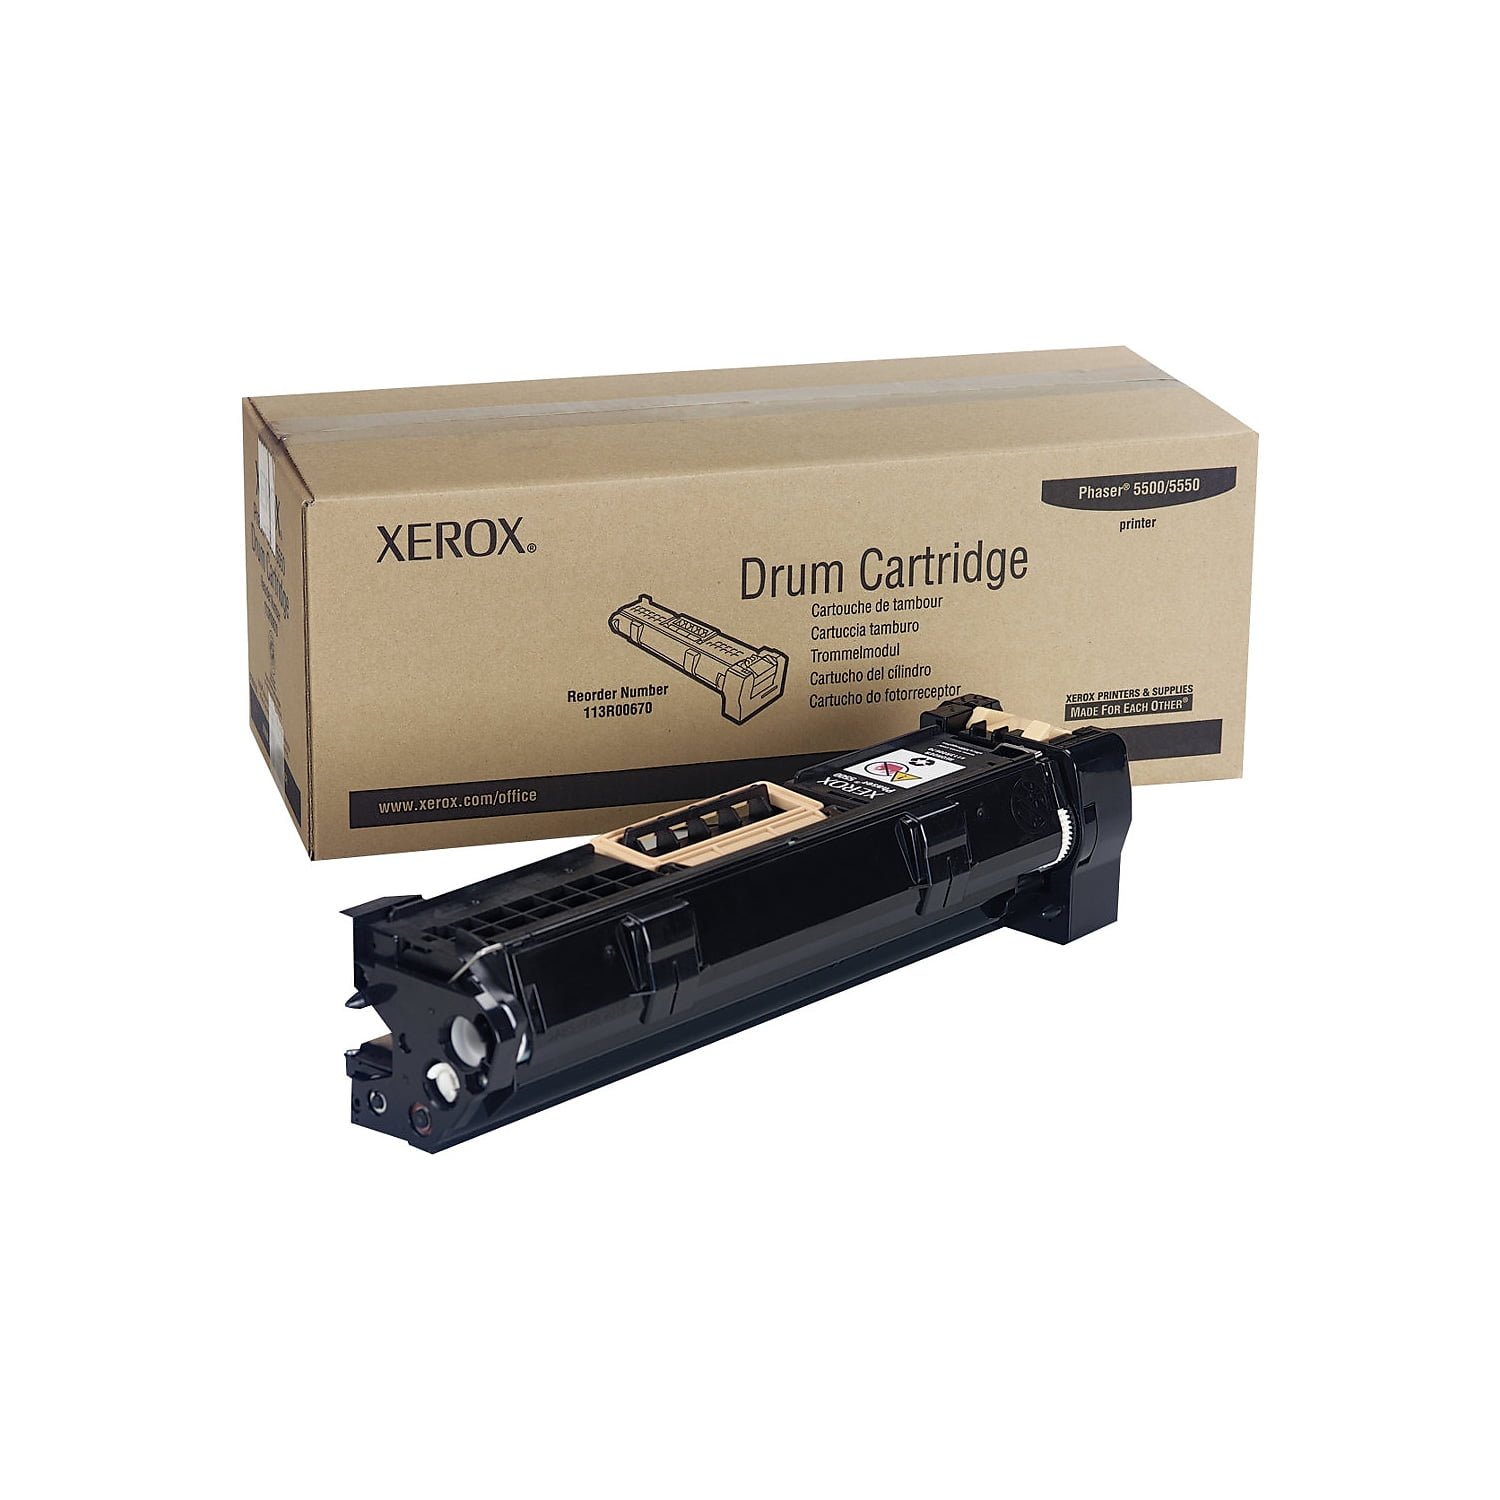 Xerox Drum Cartridge for the Phaser 5500/5550, 113R00670